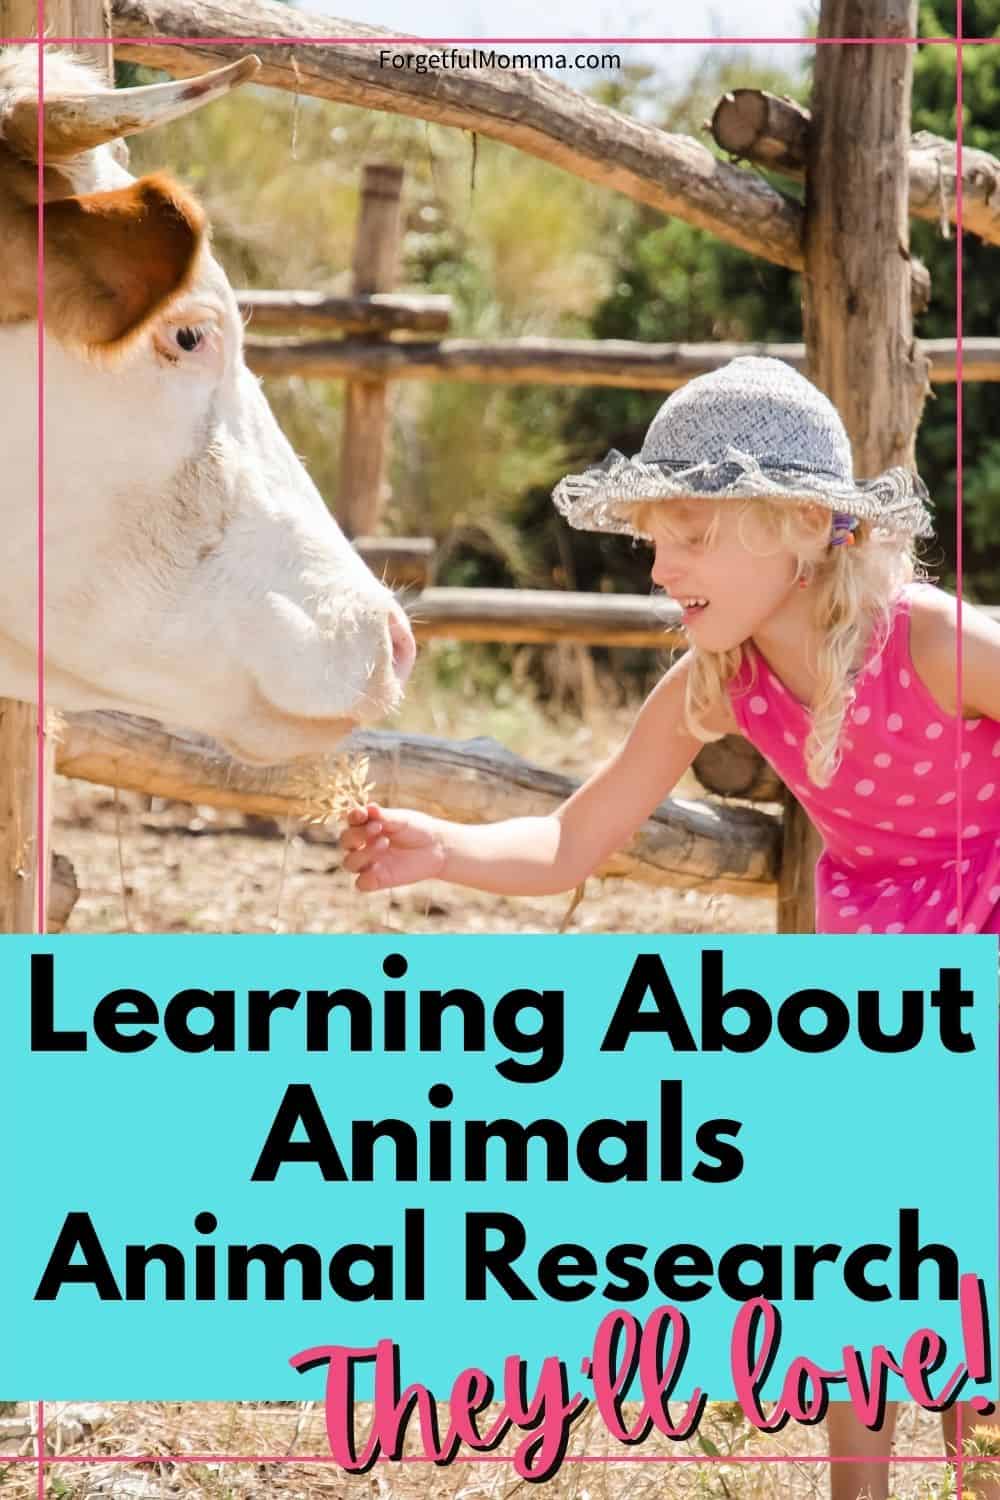 Learning About Animals - Animal Research